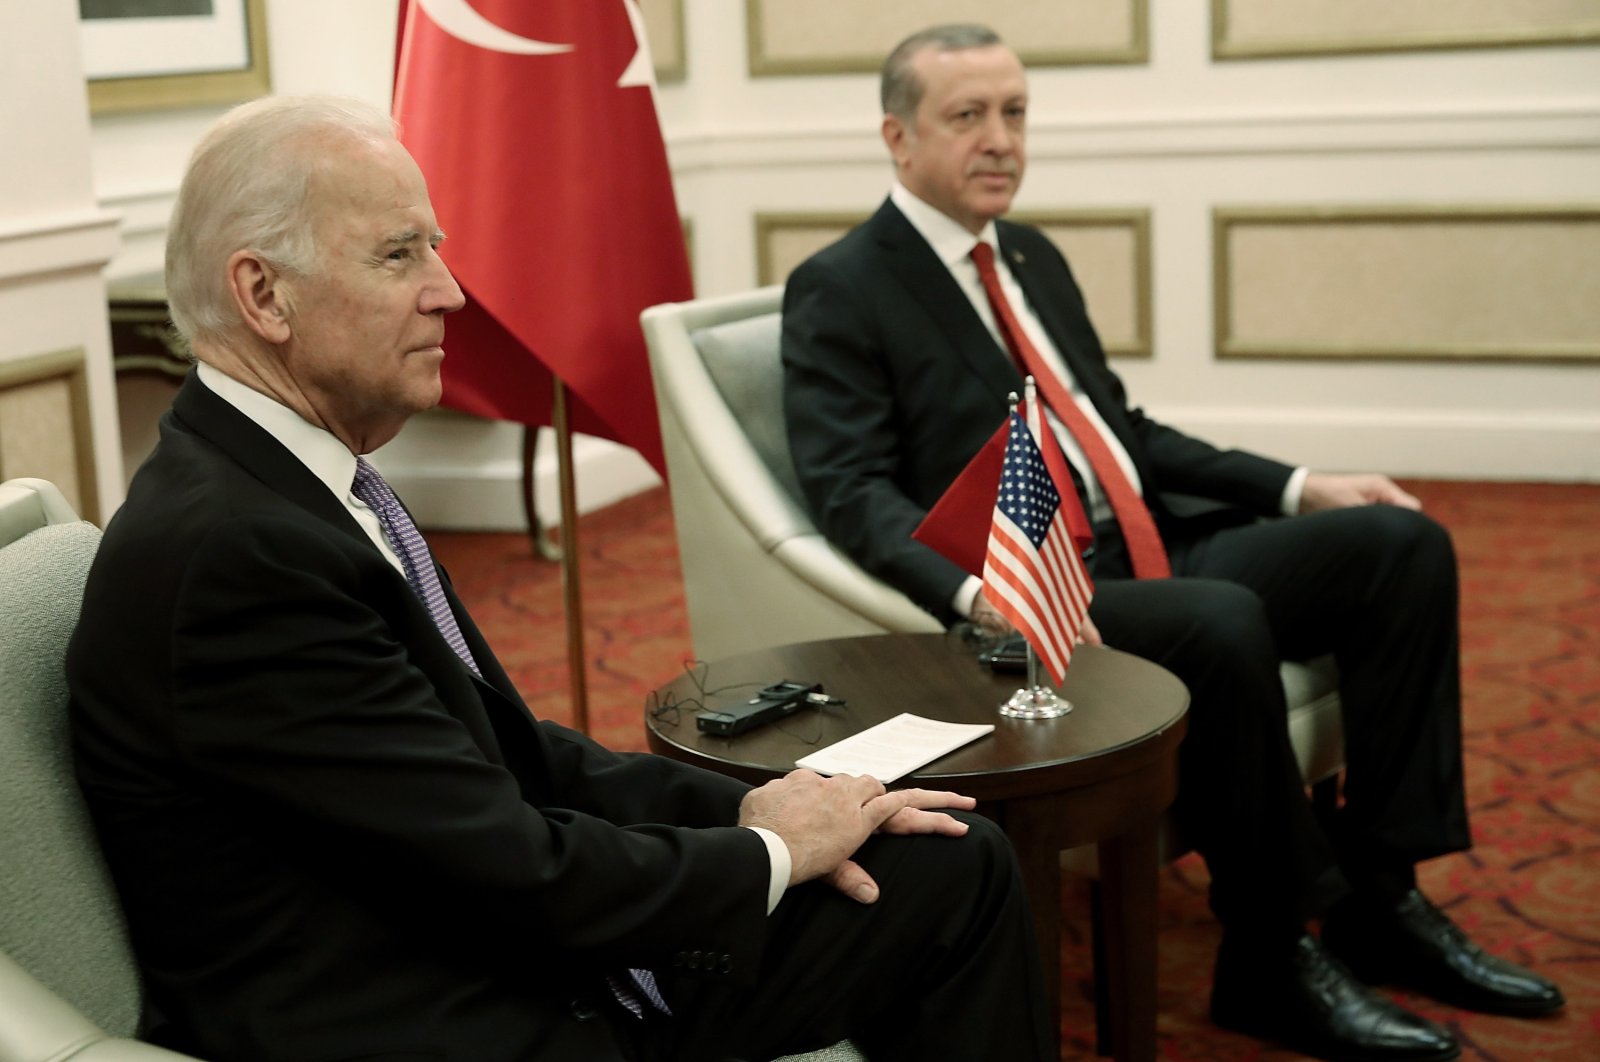 U.S. Vice President Joe Biden (L) meets with Turkish President Recep Tayyip Erdoğan during the Nuclear Security Summit, in Washington, D.C., U.S., March 31, 2016 (Getty Images)